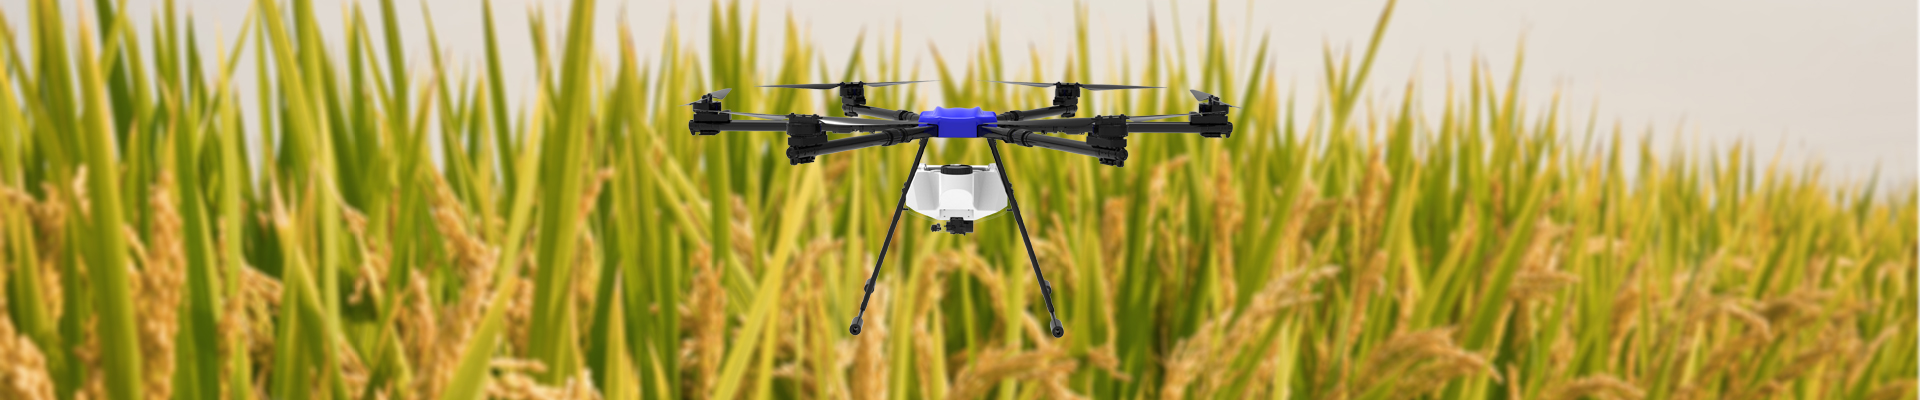 MX616 Multi rotor Agricultural Drone